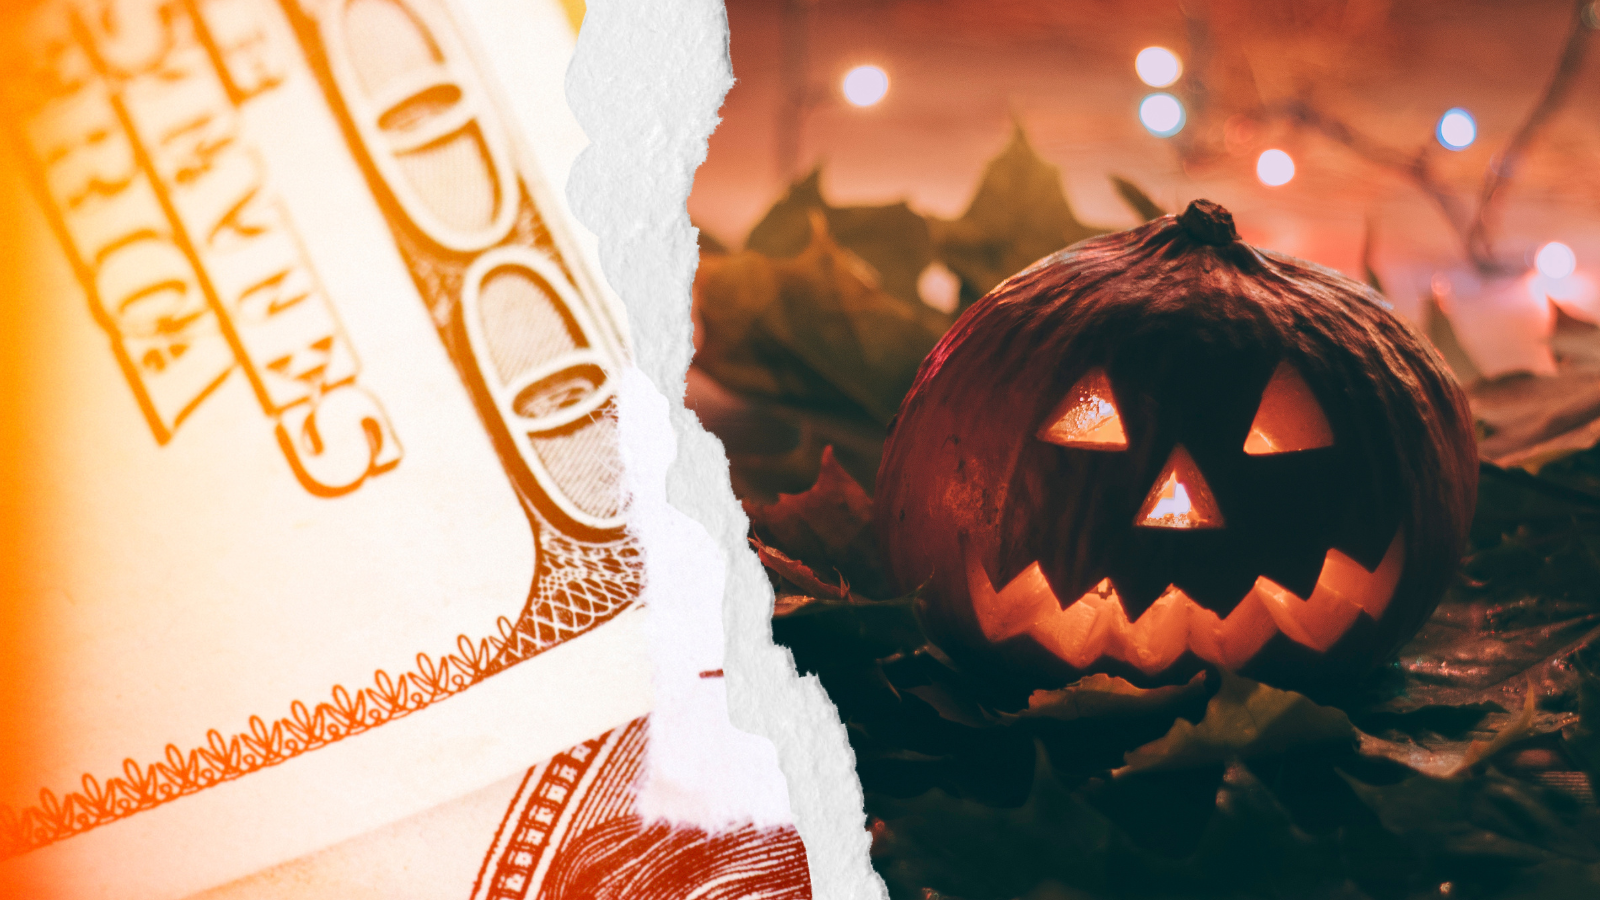 Interest rates and spending habits are taking hits, but not when Halloween is concerned....